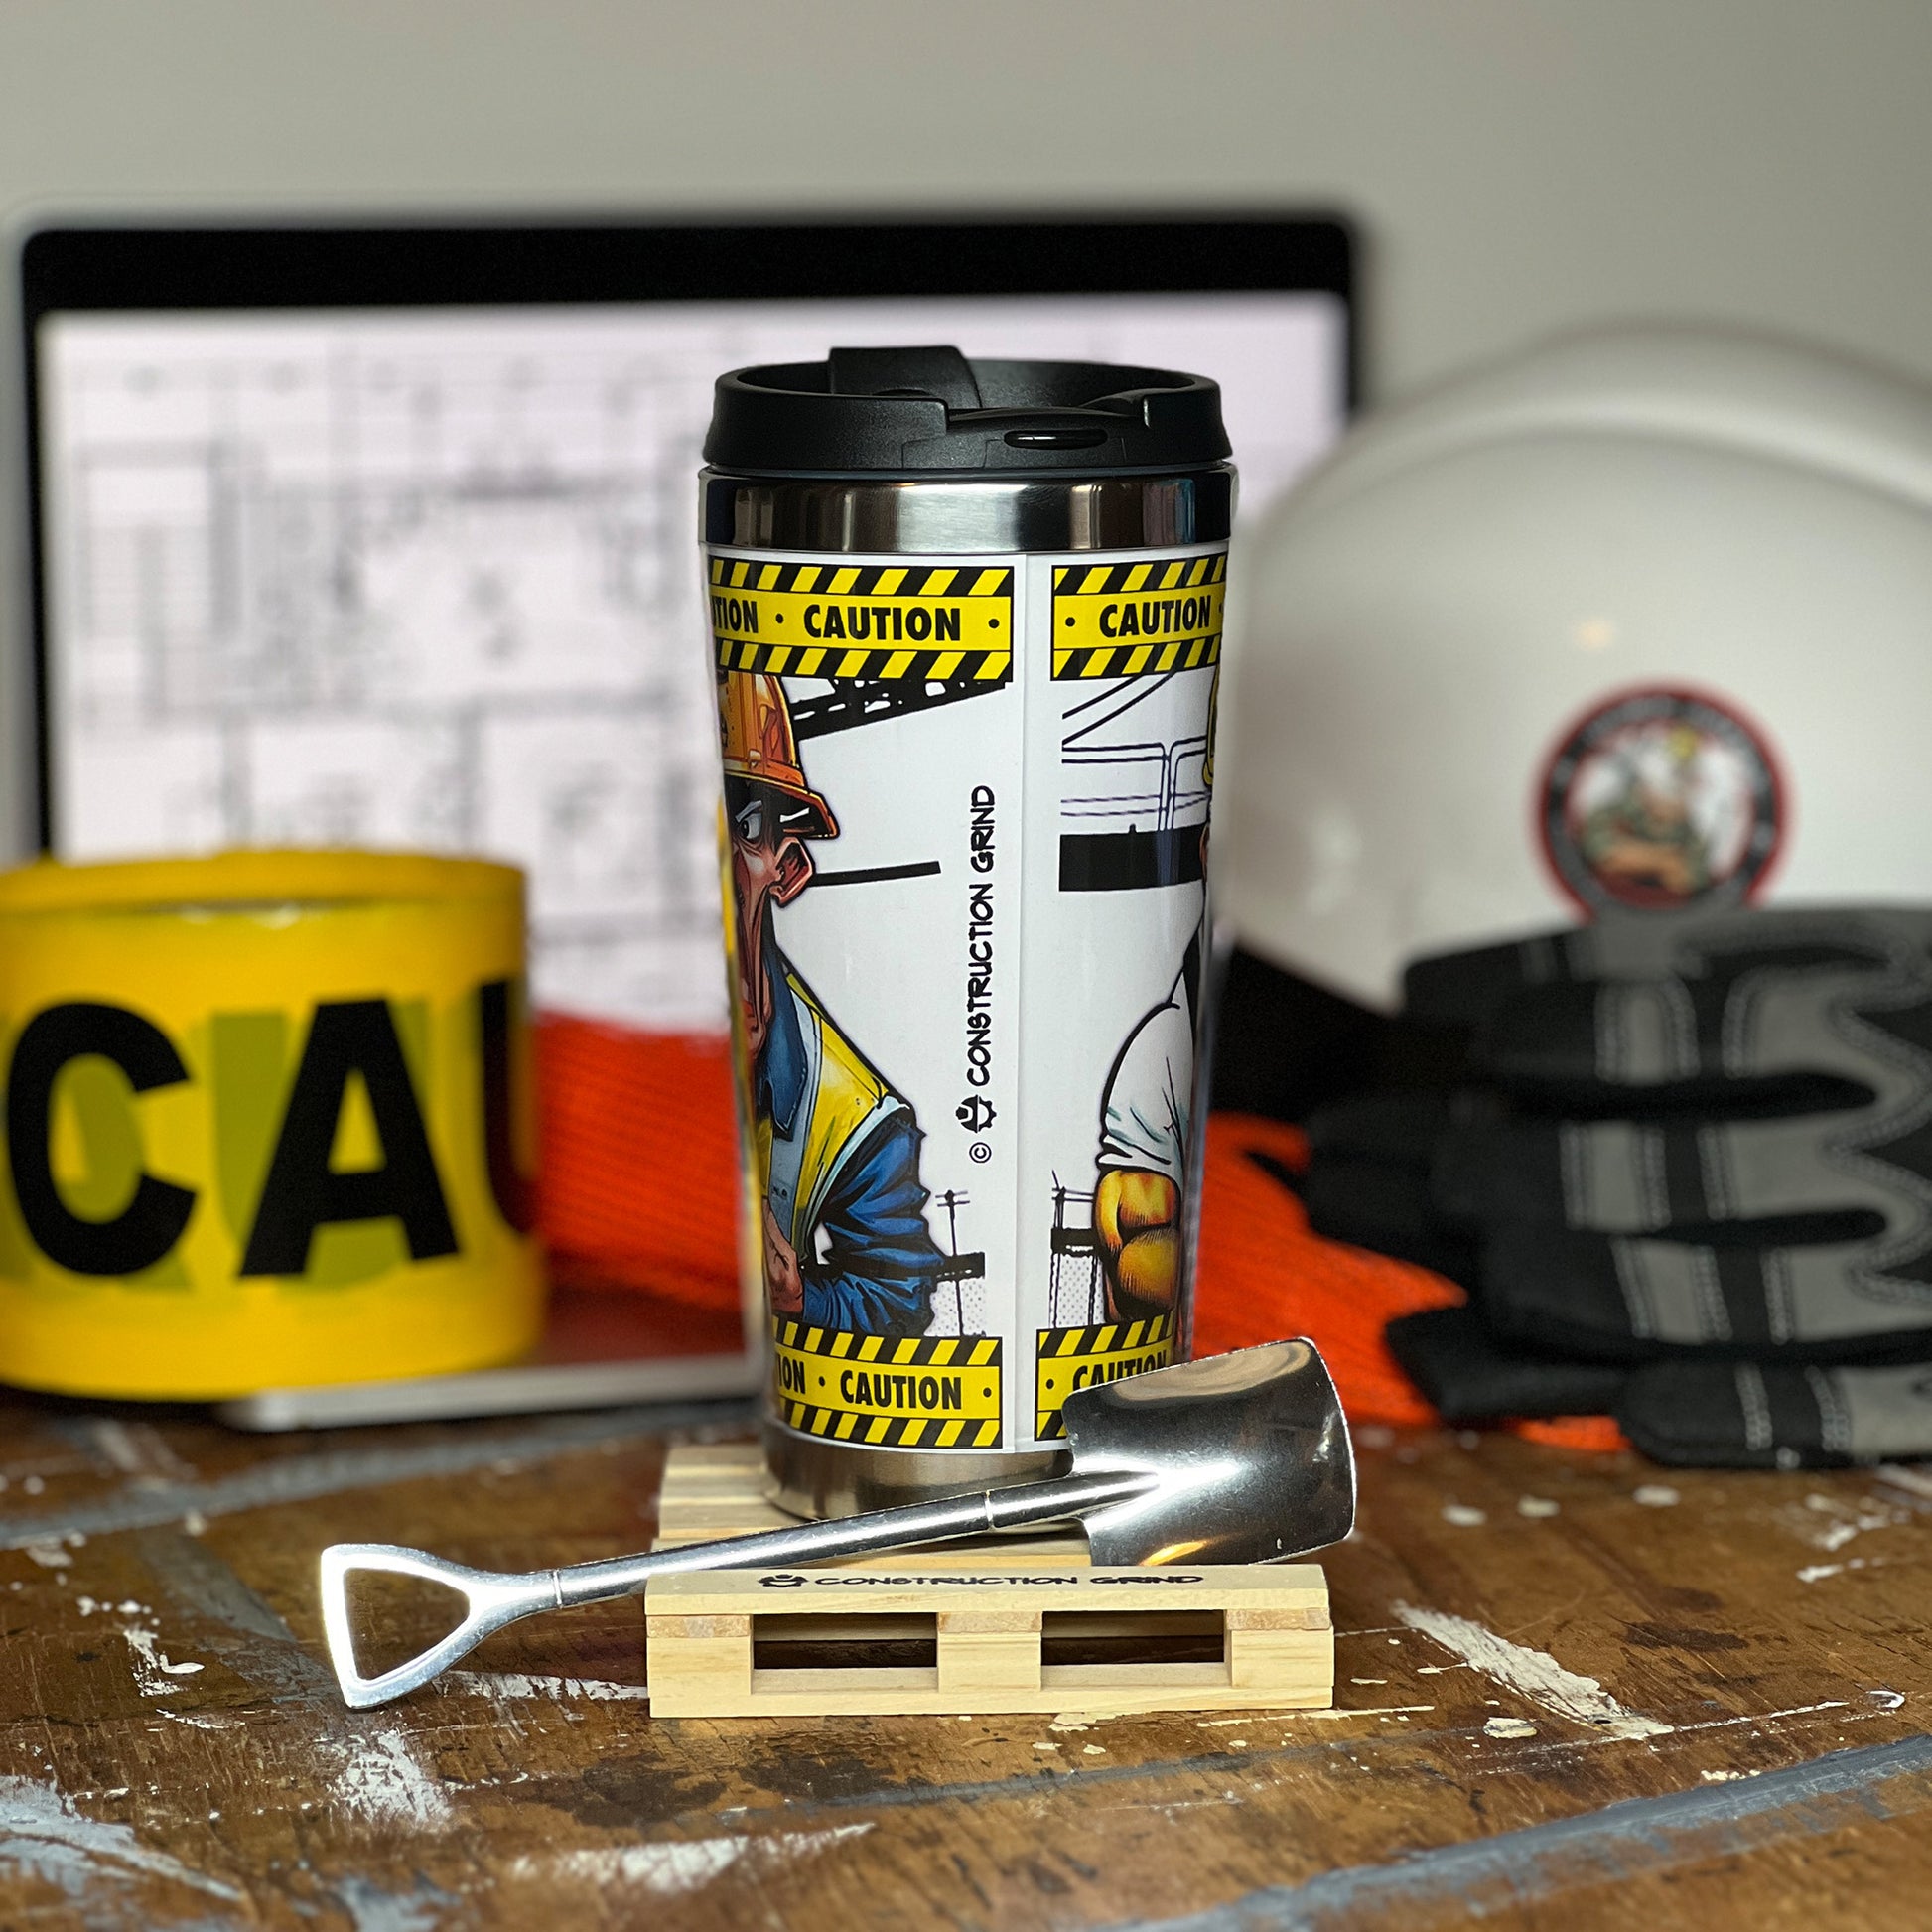 Construction Grind's "Meet the Crew" First Shift 12 oz. coffee tumbler sitting on a 4" wooden pallet coaster. Showing the rear image seam and our logo.